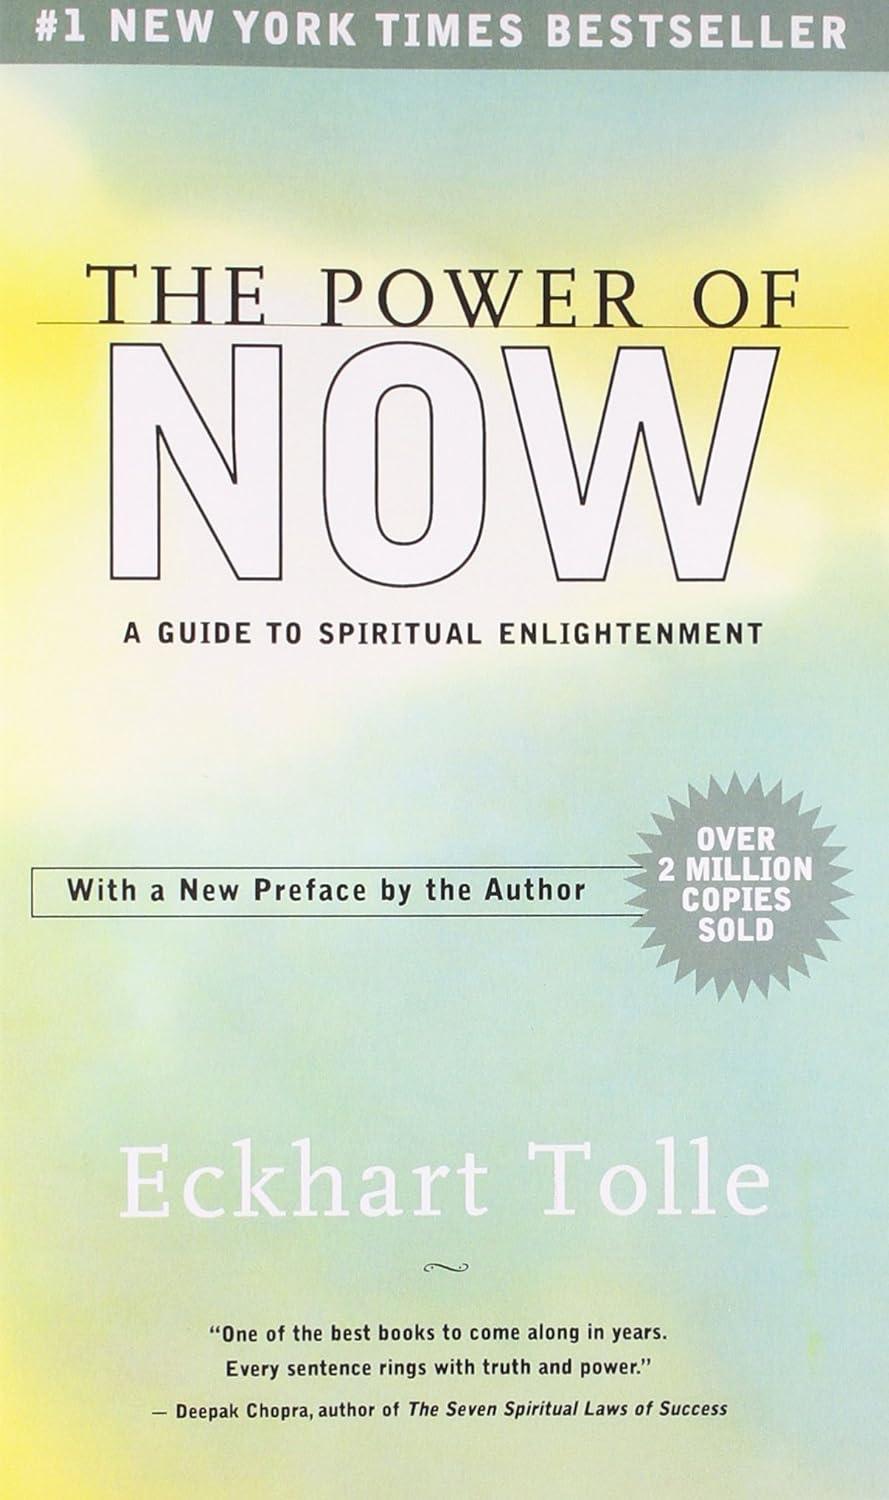  Exploring the Depths of Spirituality: A Guide to Popular Nonfiction Spirituality Books